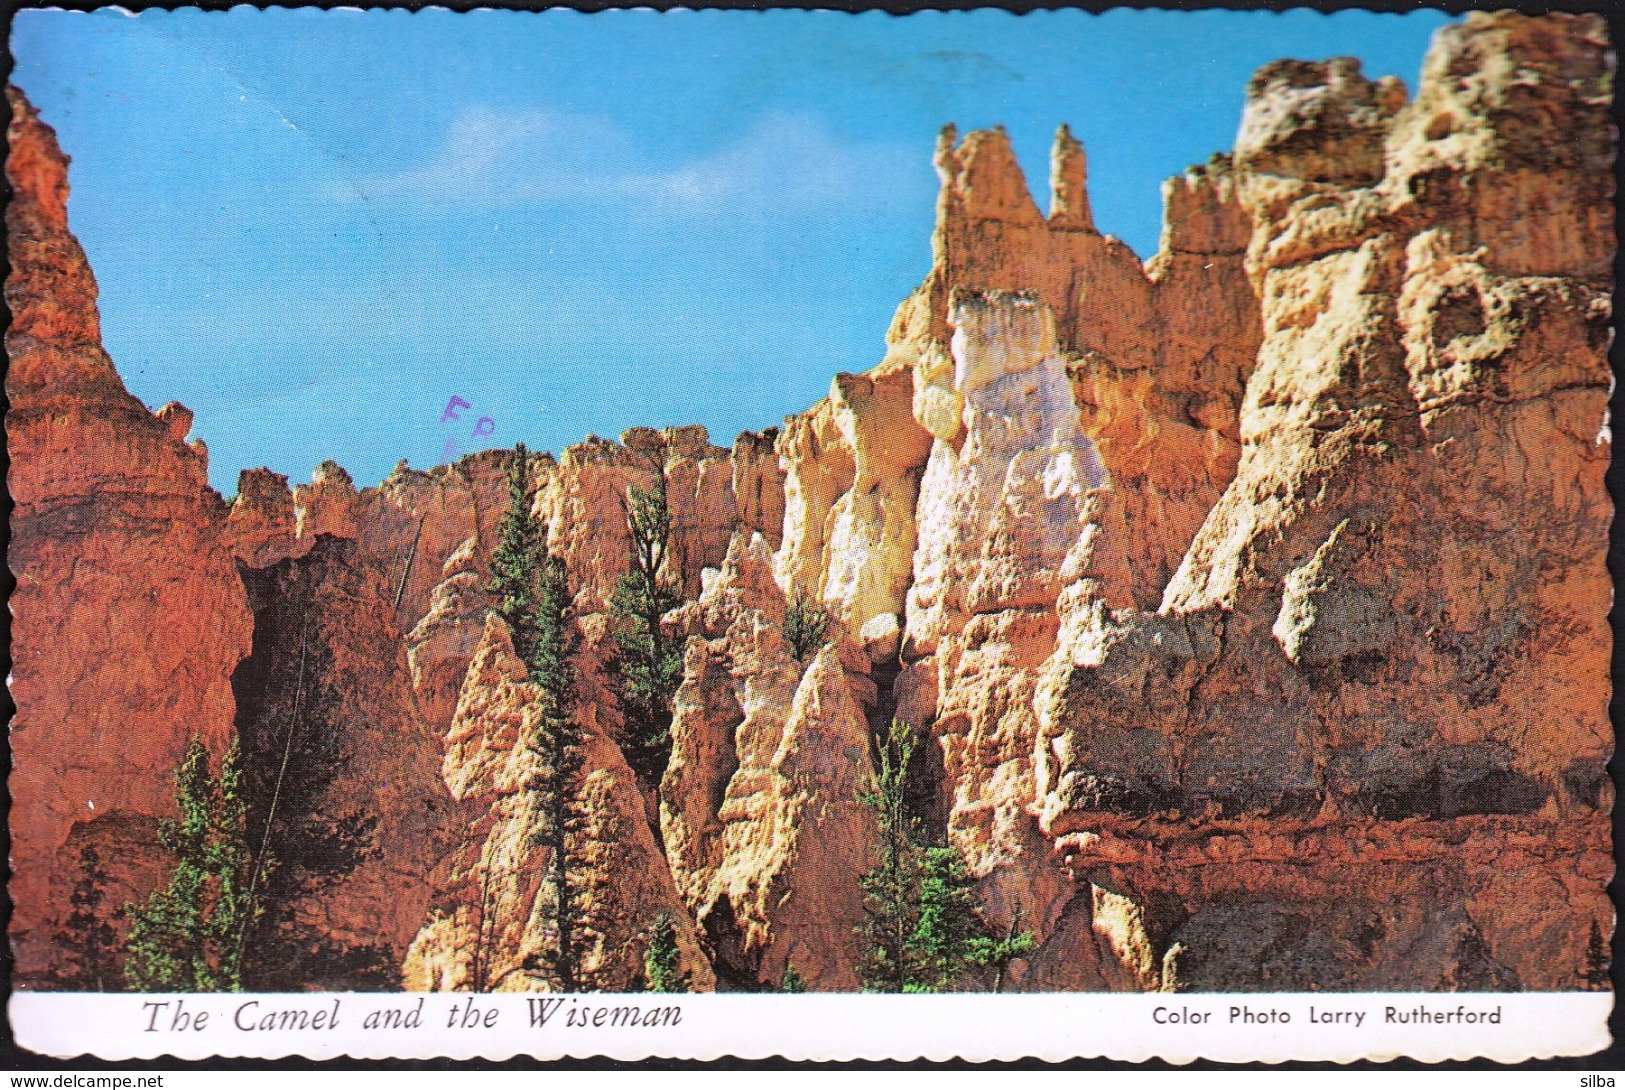 United States New York 1975 / The Camel And The Wiseman / Bryce Canyon National Park, Utah - Bryce Canyon